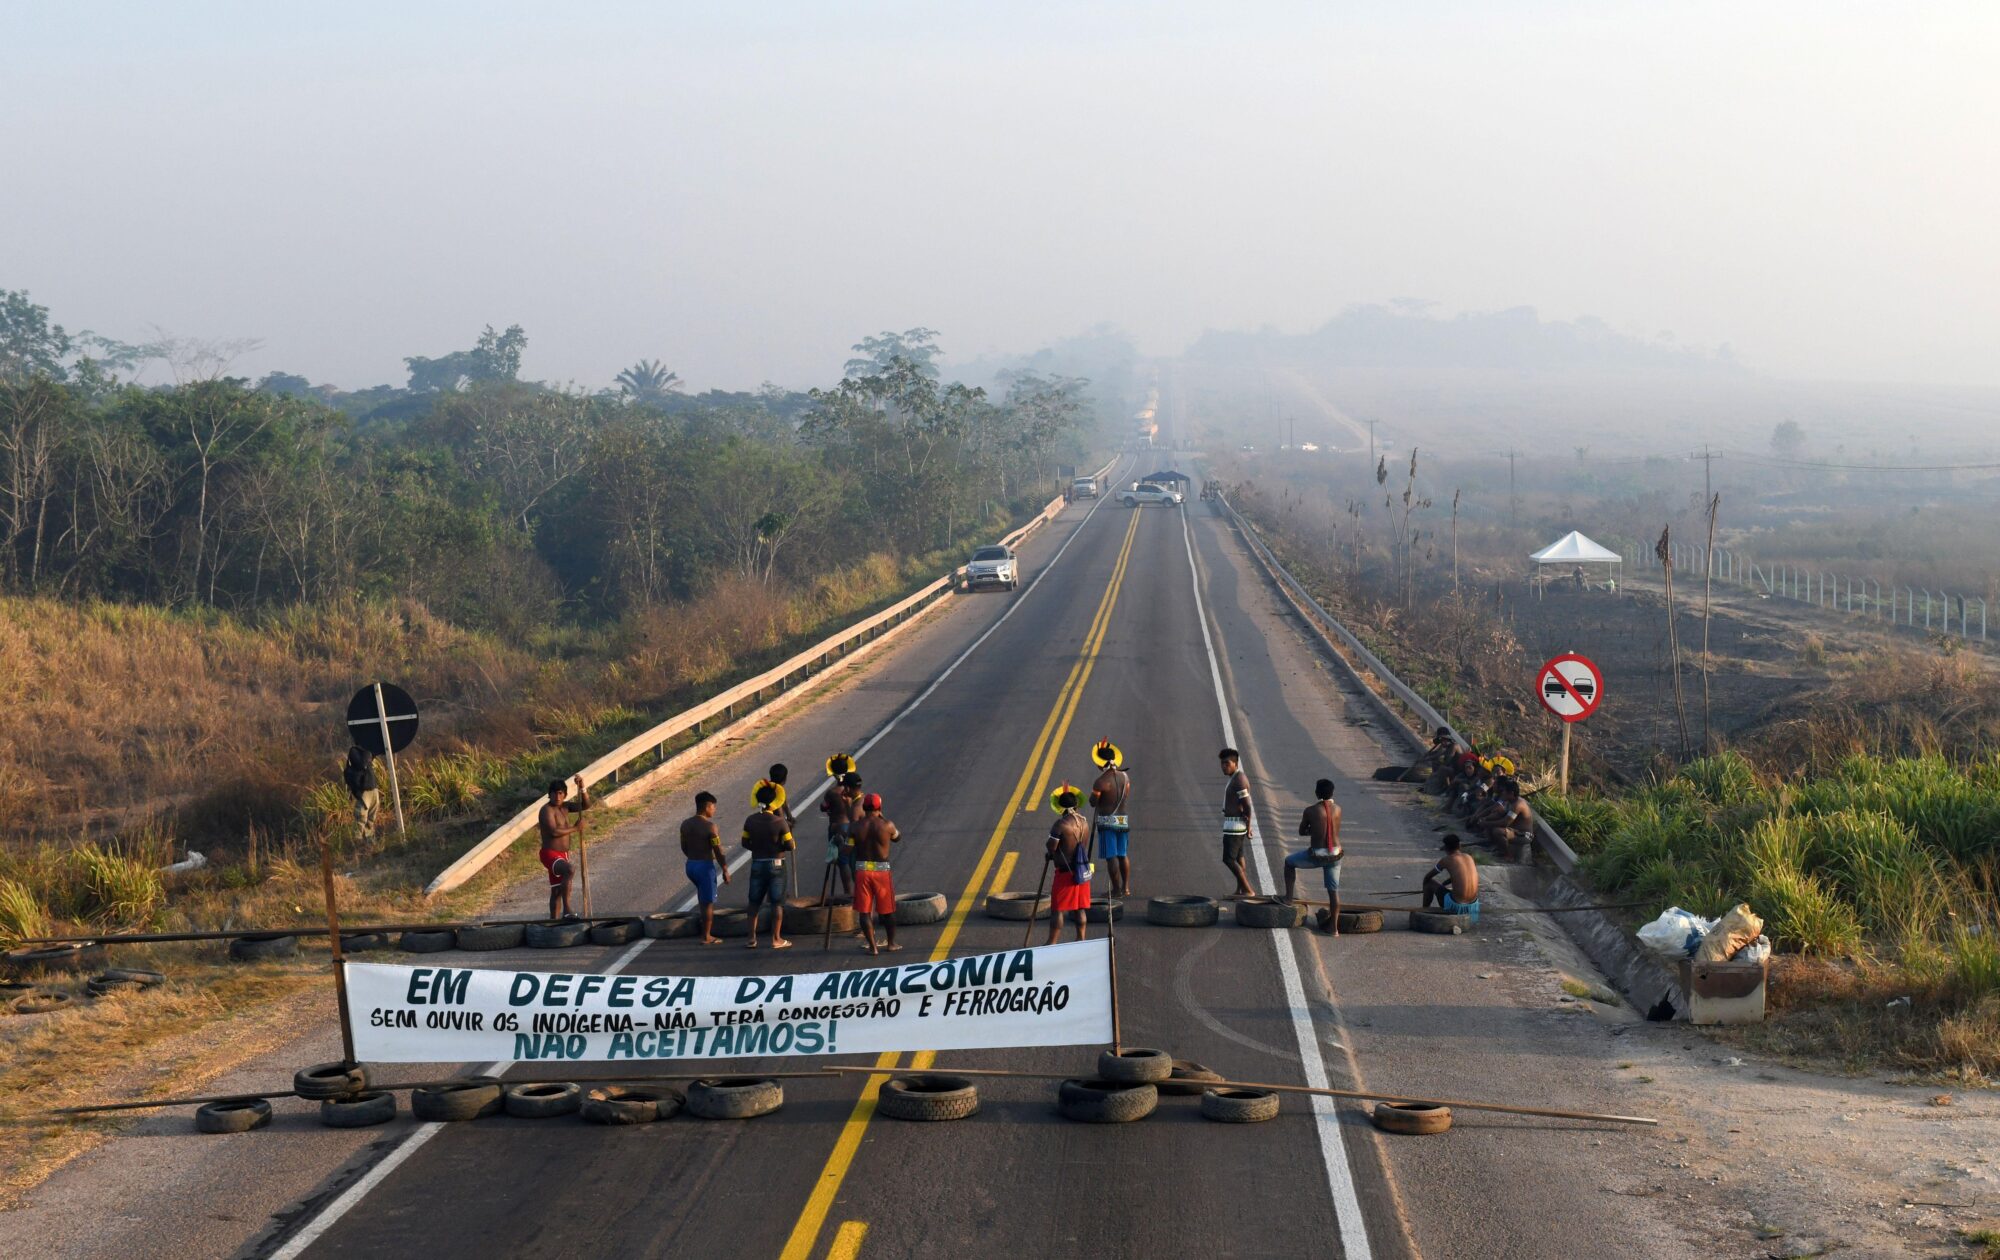 <p>Protestors block the BR-163 highway in Pará state in August 2020 (image: Alamy)</p>